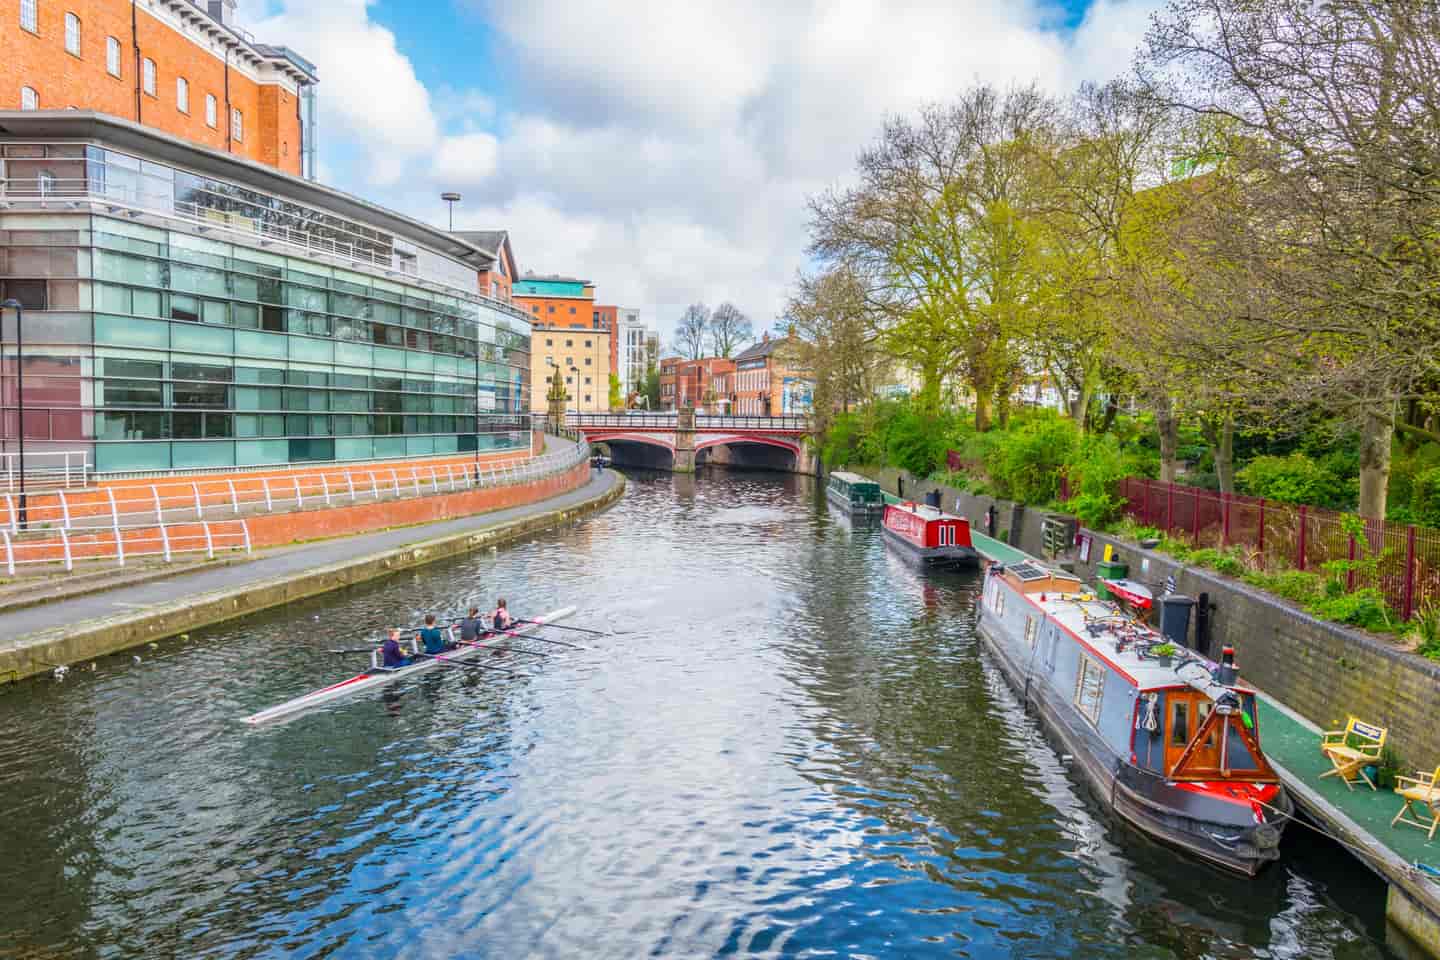 Student Accommodation in Leicester - Rowing and Narrowboats on the River Soar